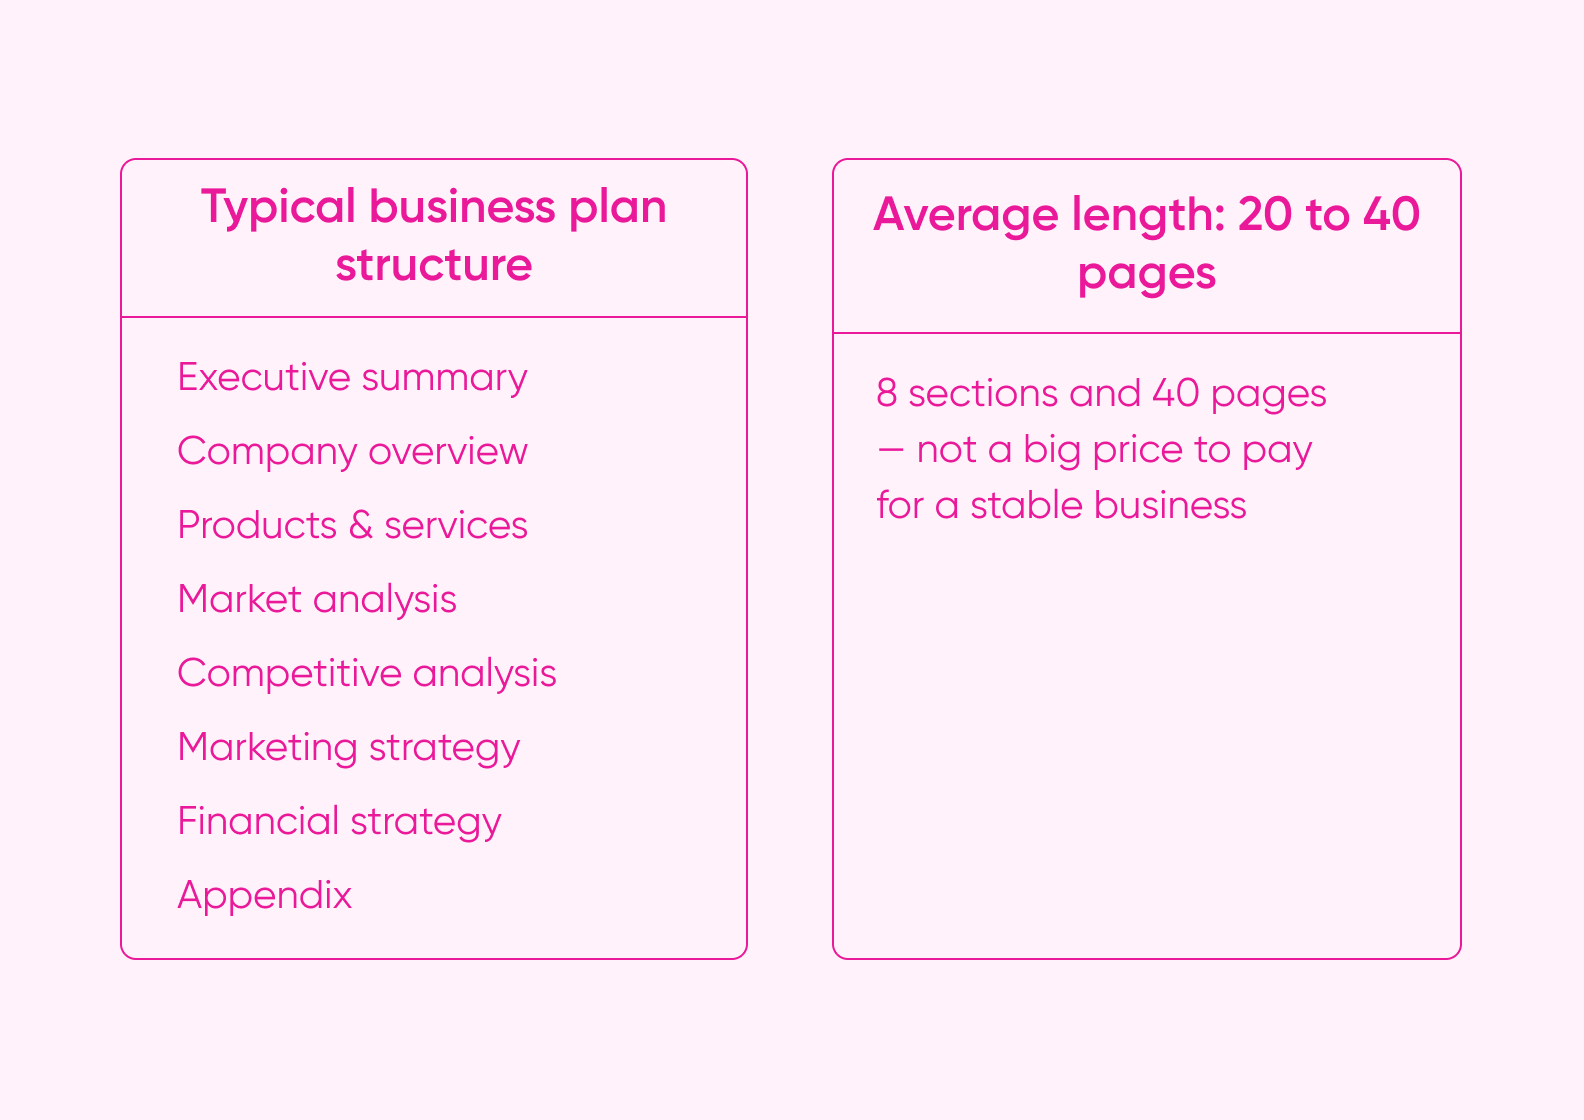 The typical structure of a business plan